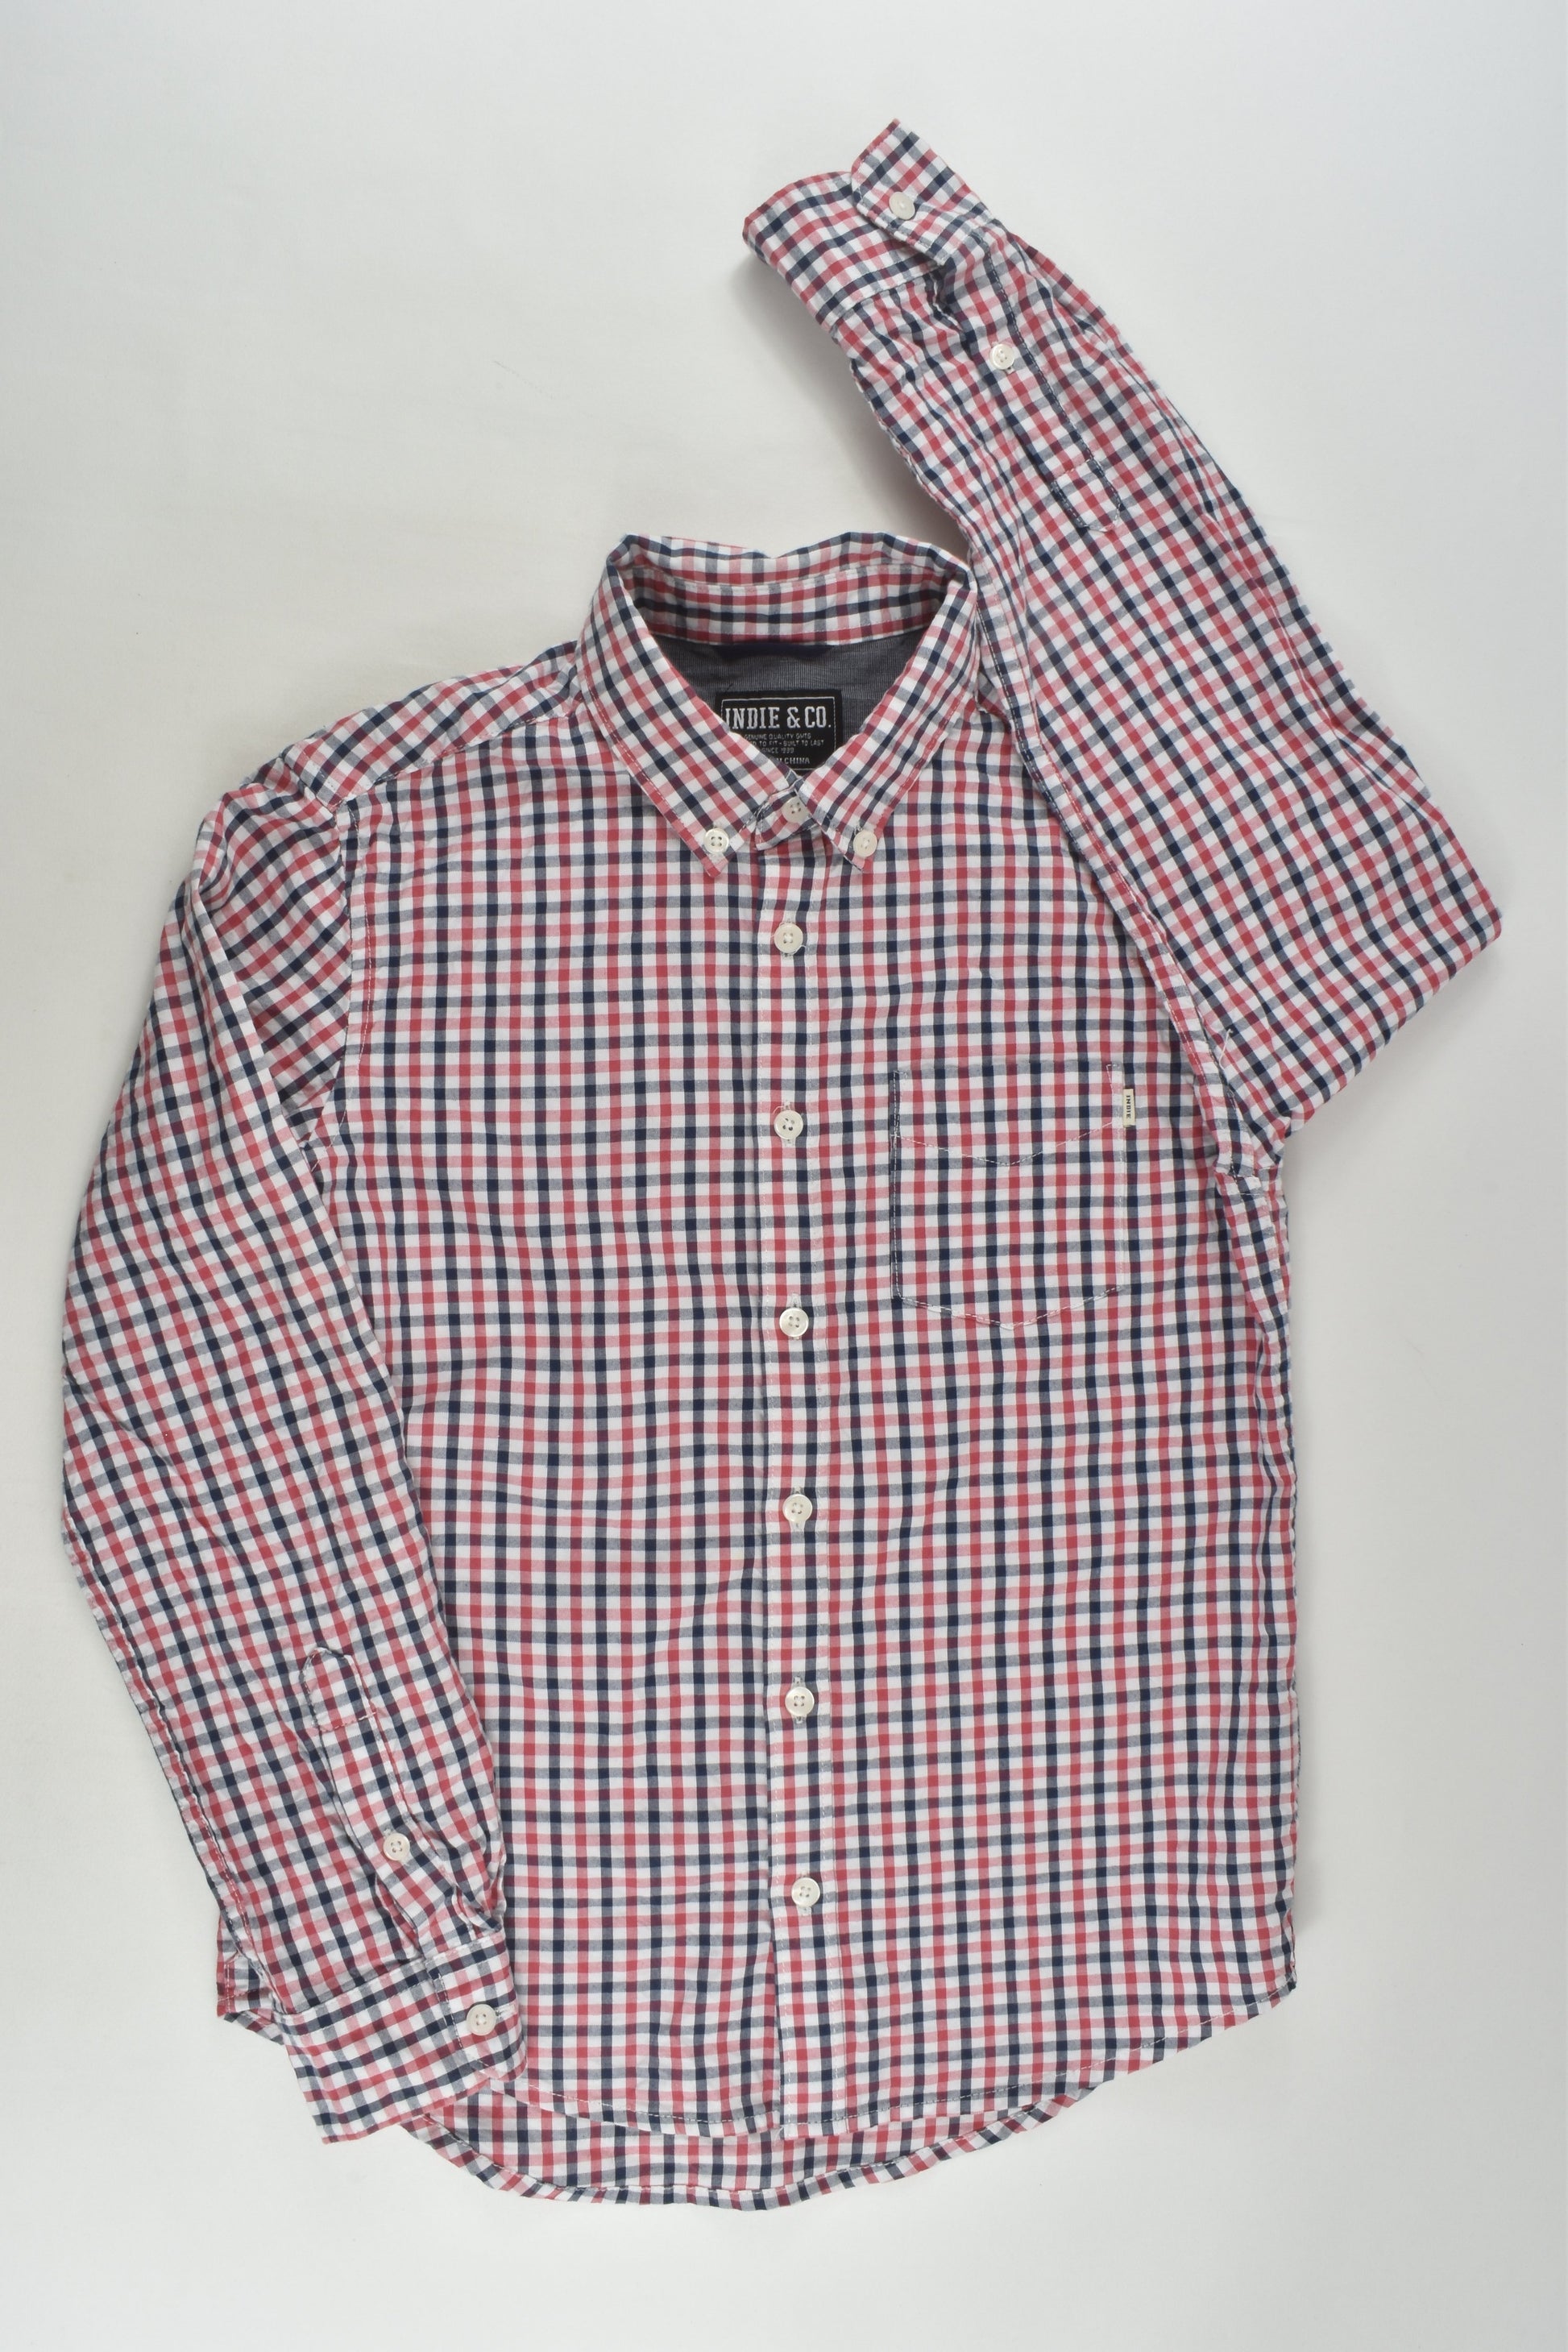 Indie & Co Size 8 Checked Shirt